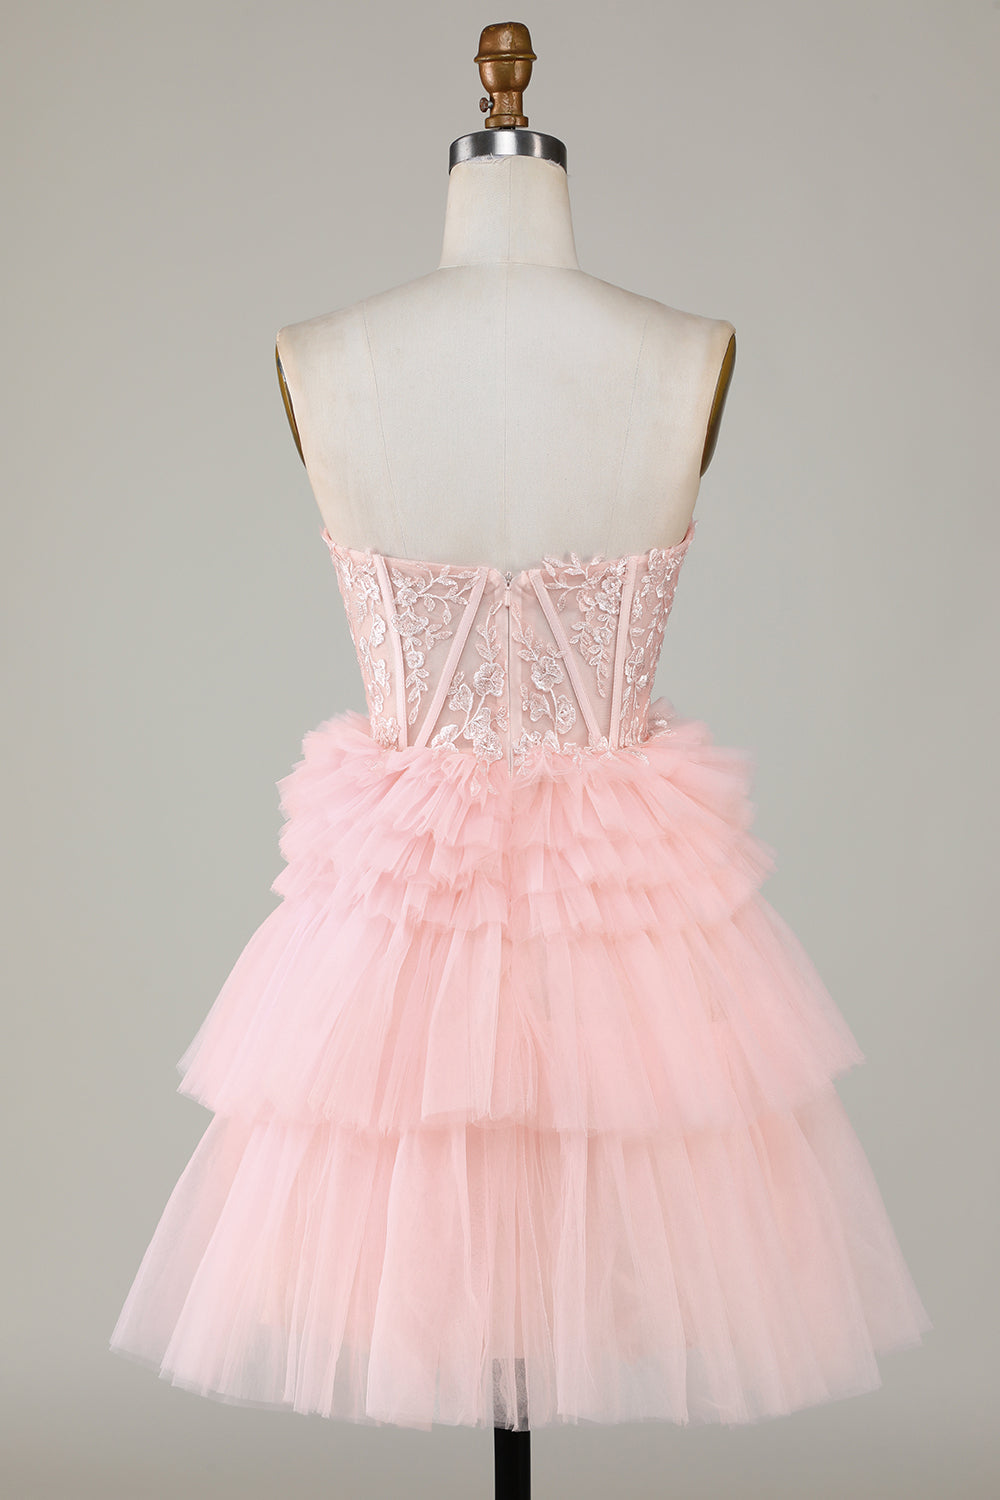 Cute A Line Tiered Sweetheart Tulle Short Homecoming Dresses with Ruffles